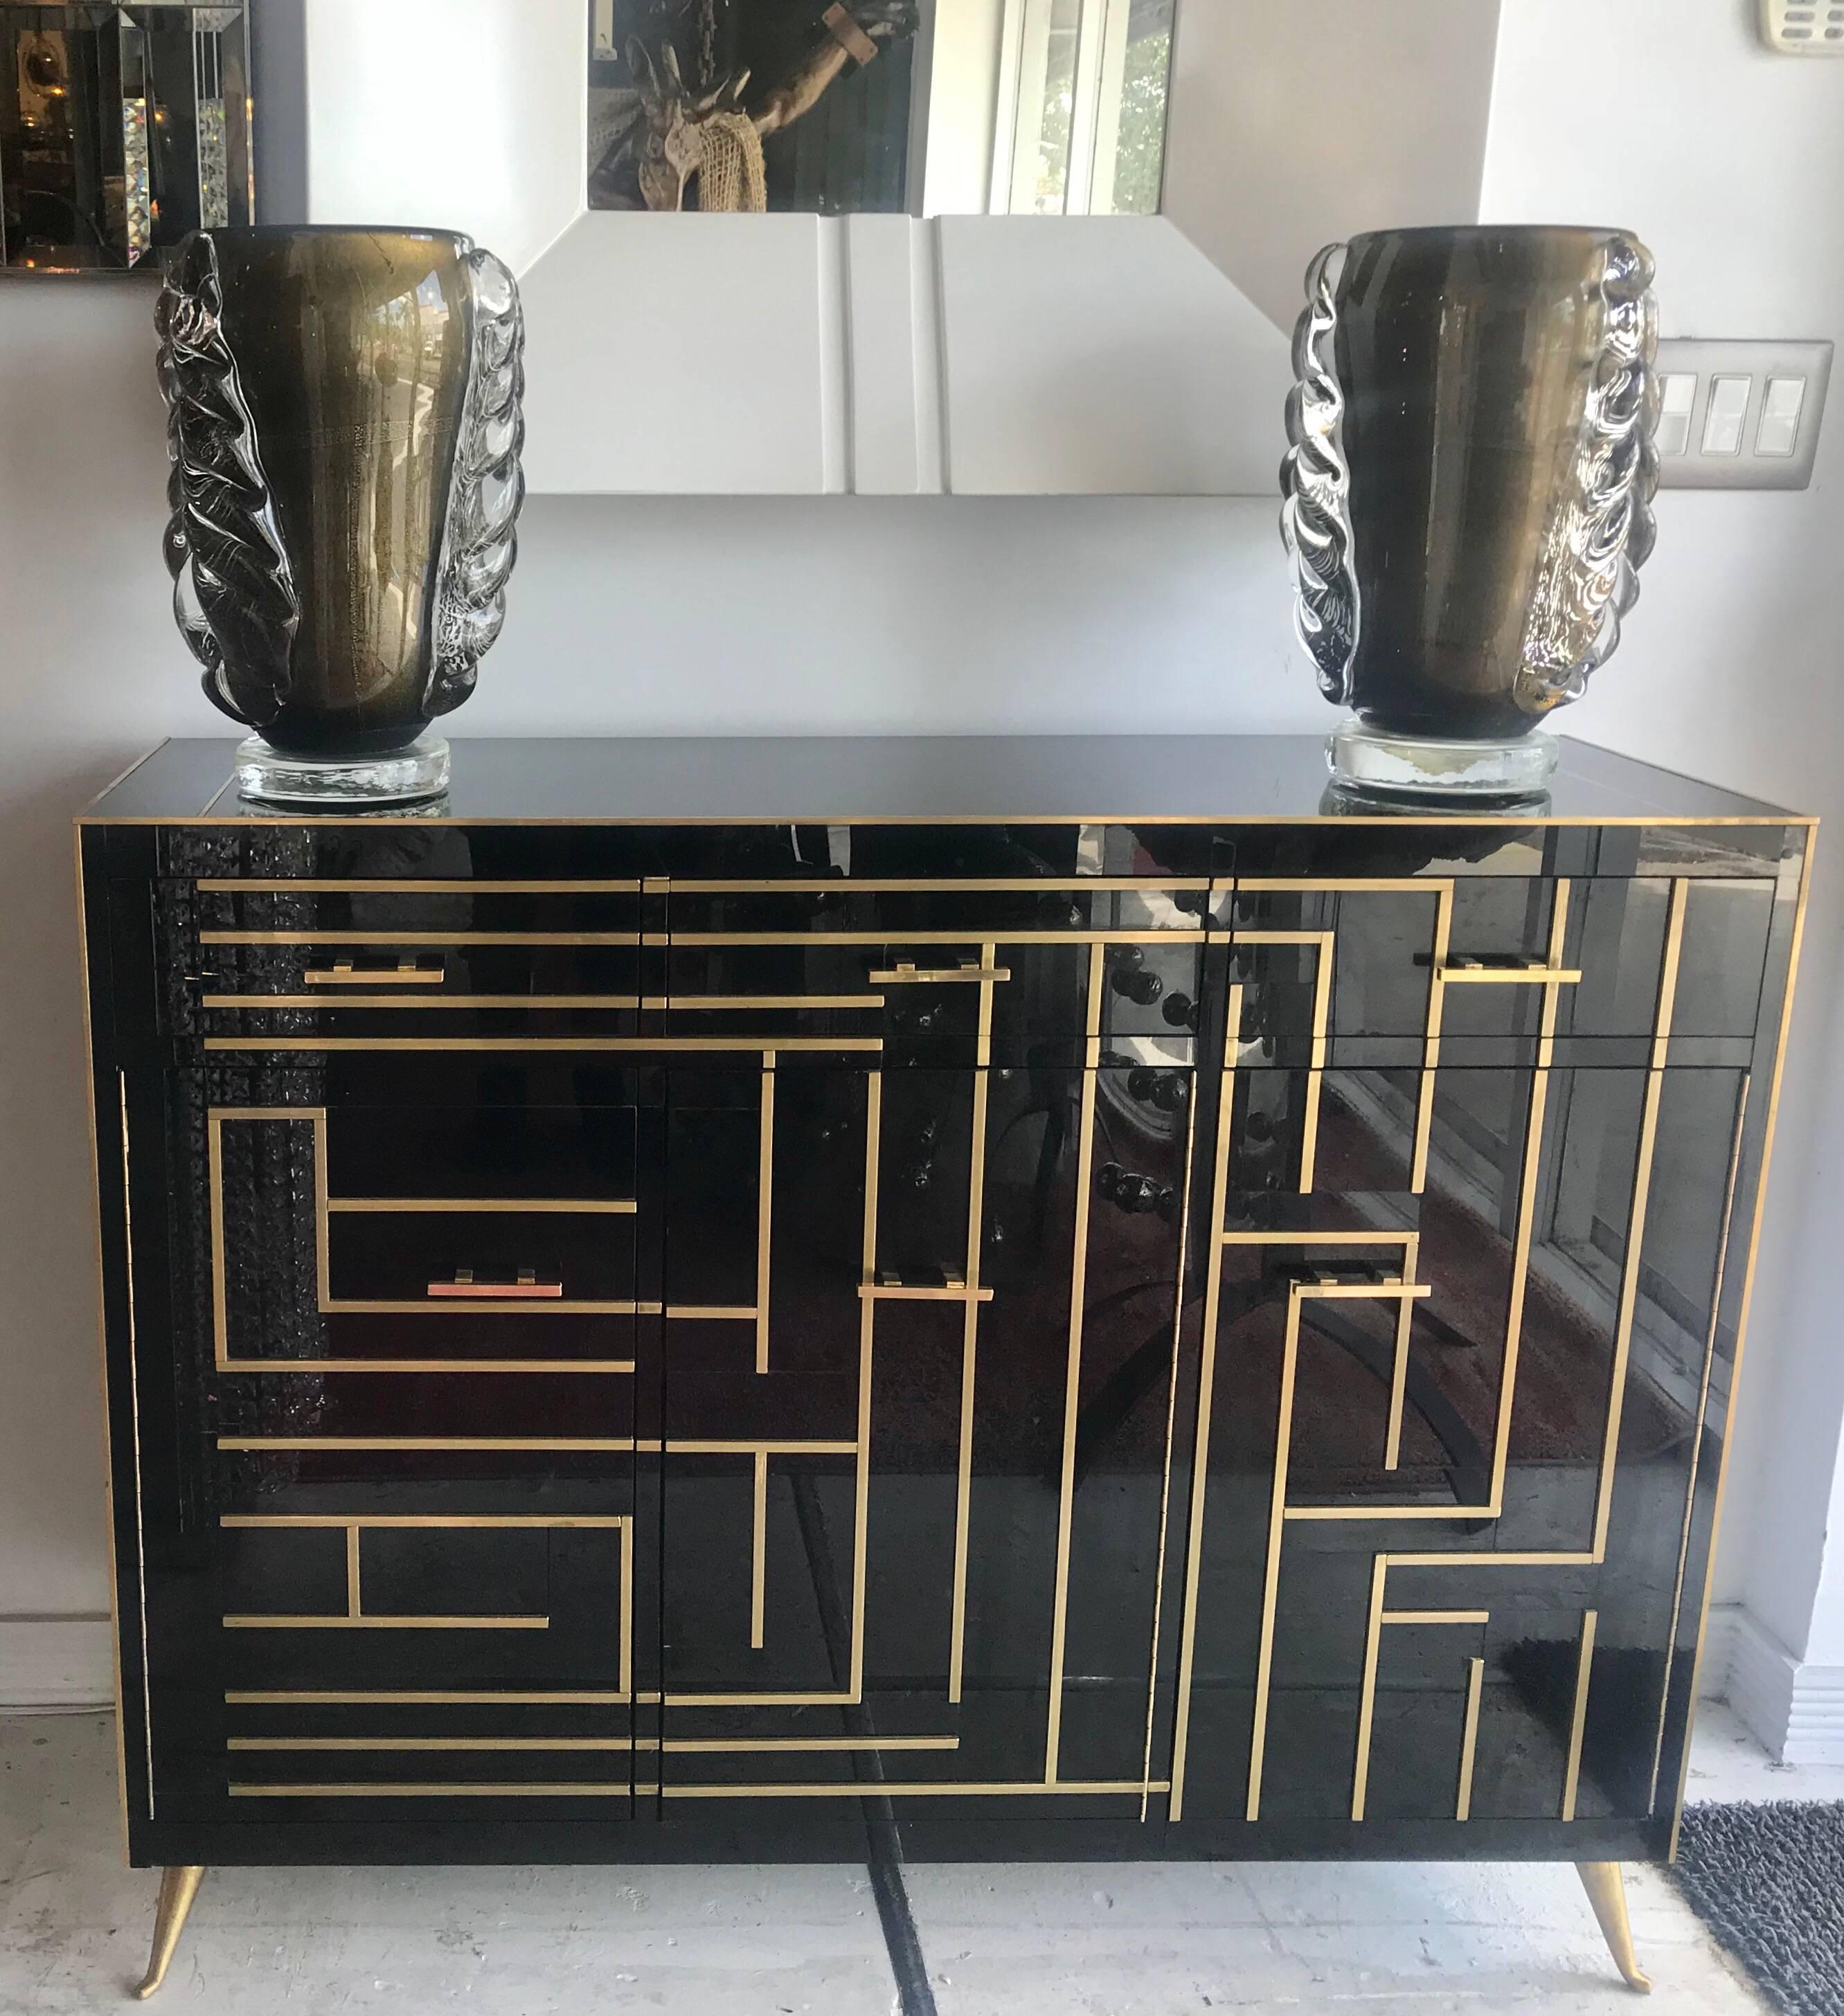 20th Century Italian Glass and Brass Sideboard